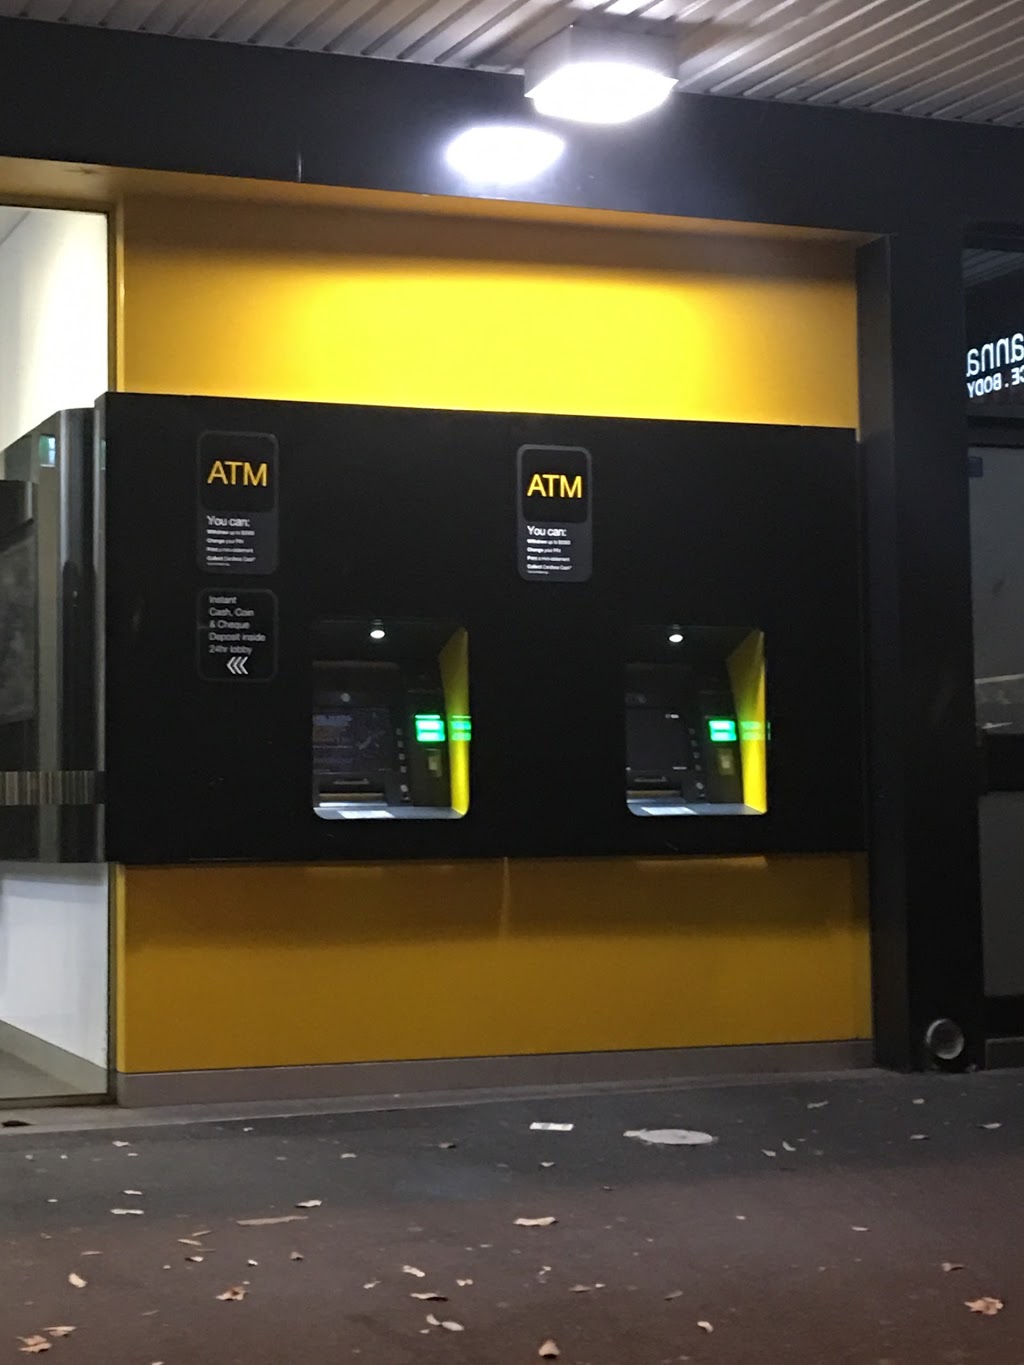 Commonwealth Bank | bank | 435 Crown St, Surry Hills NSW 2010, Australia | 0293196551 OR +61 2 9319 6551